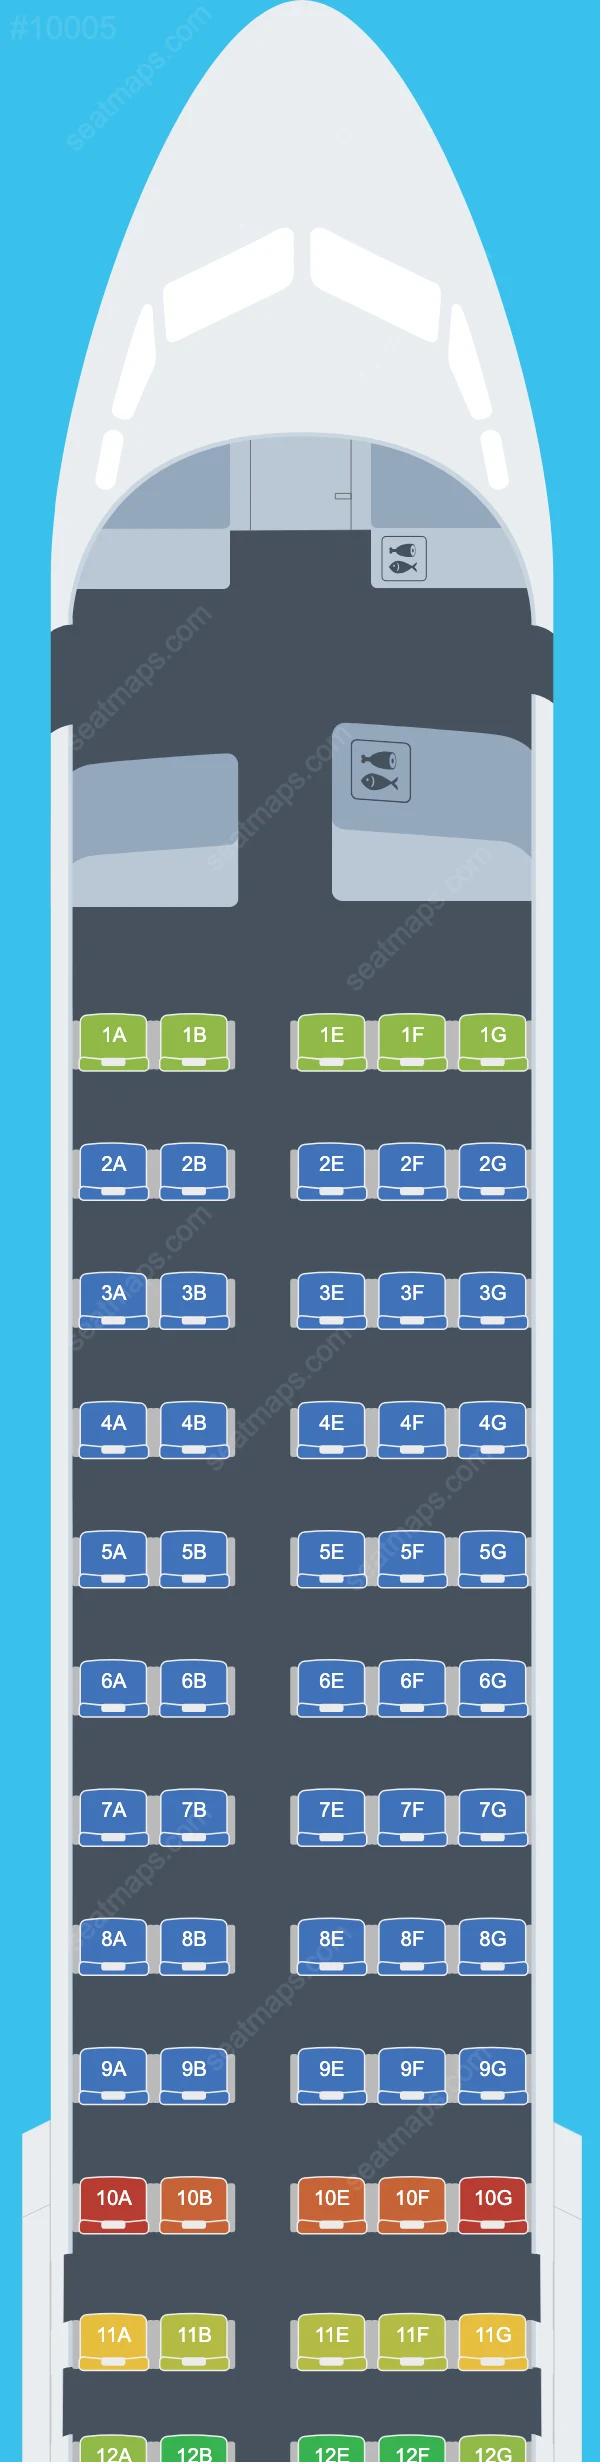 Airnorth Fokker 100 seatmap mobile preview